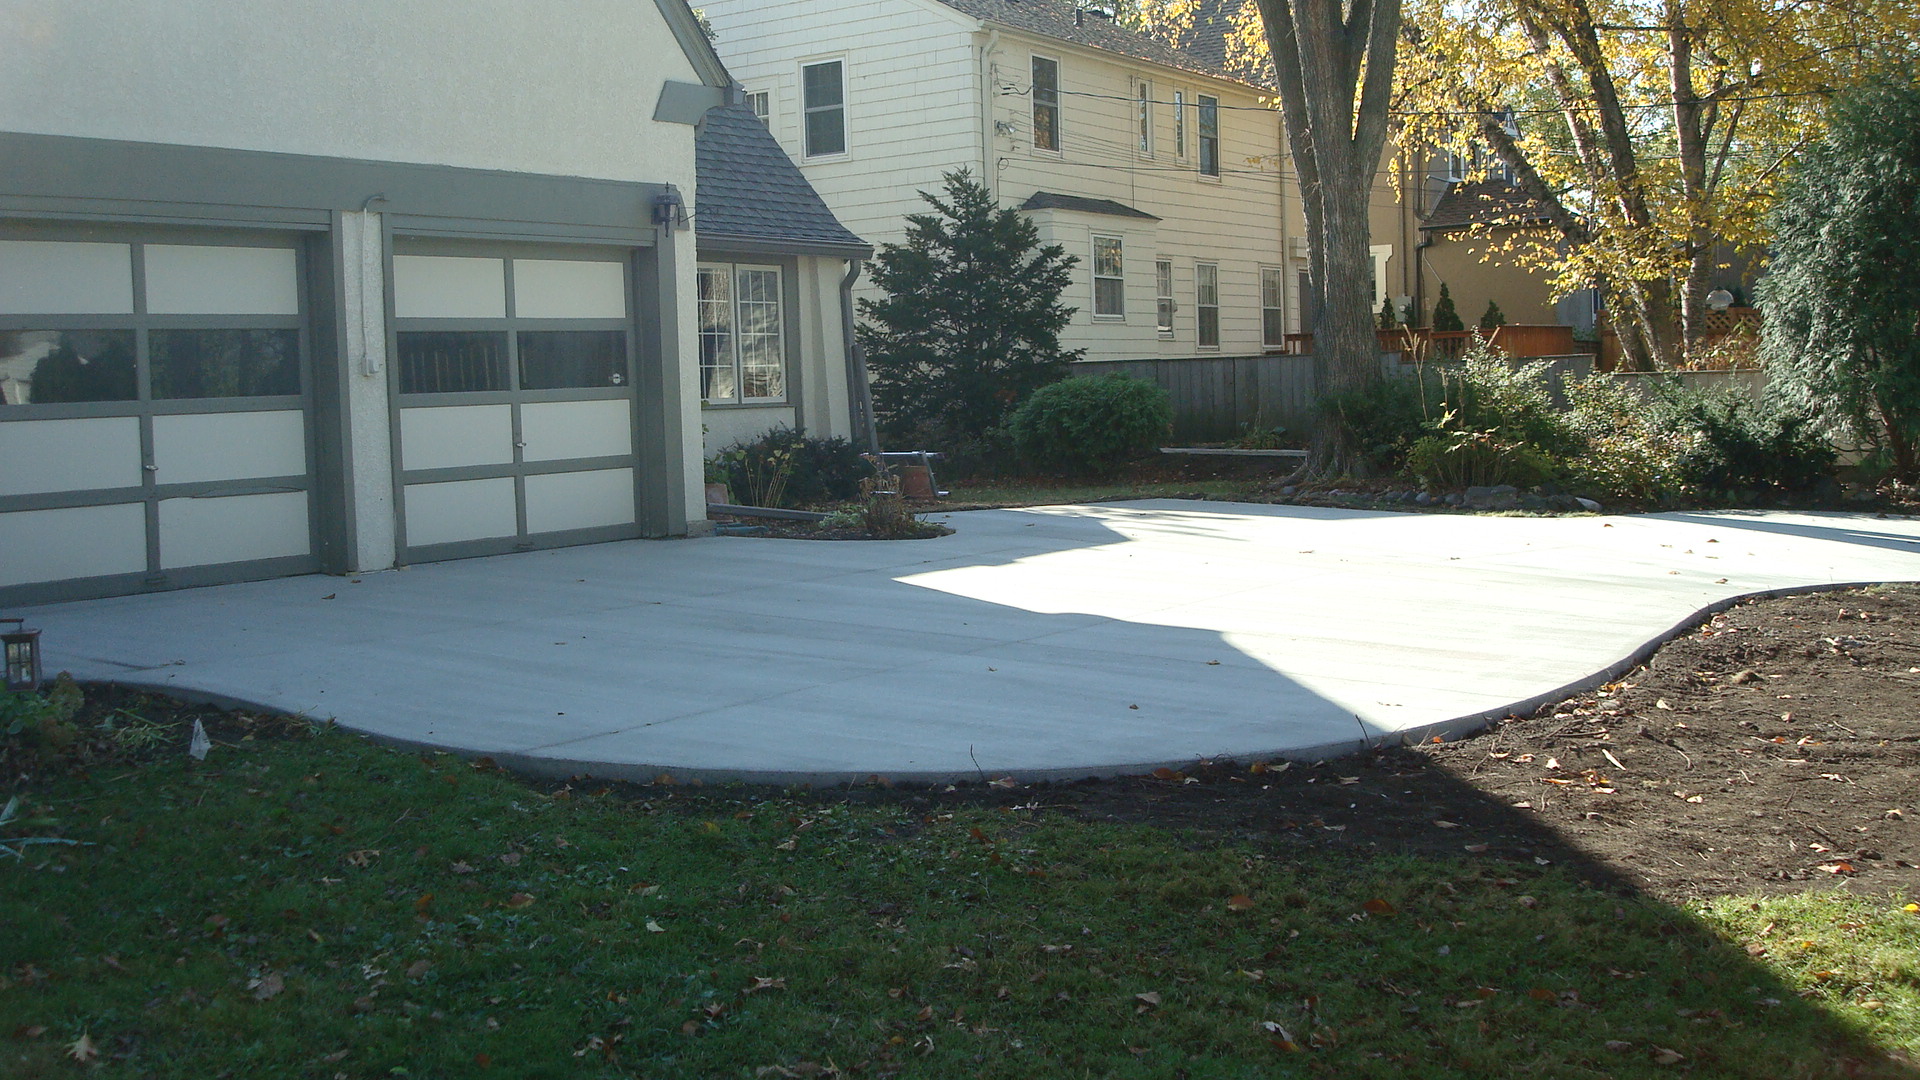 Voehl Construction Driveway, Sidewalk, and floating slab pouring, finishing and concrete services for Twin Cities metro area from Voehl Construction Inc.